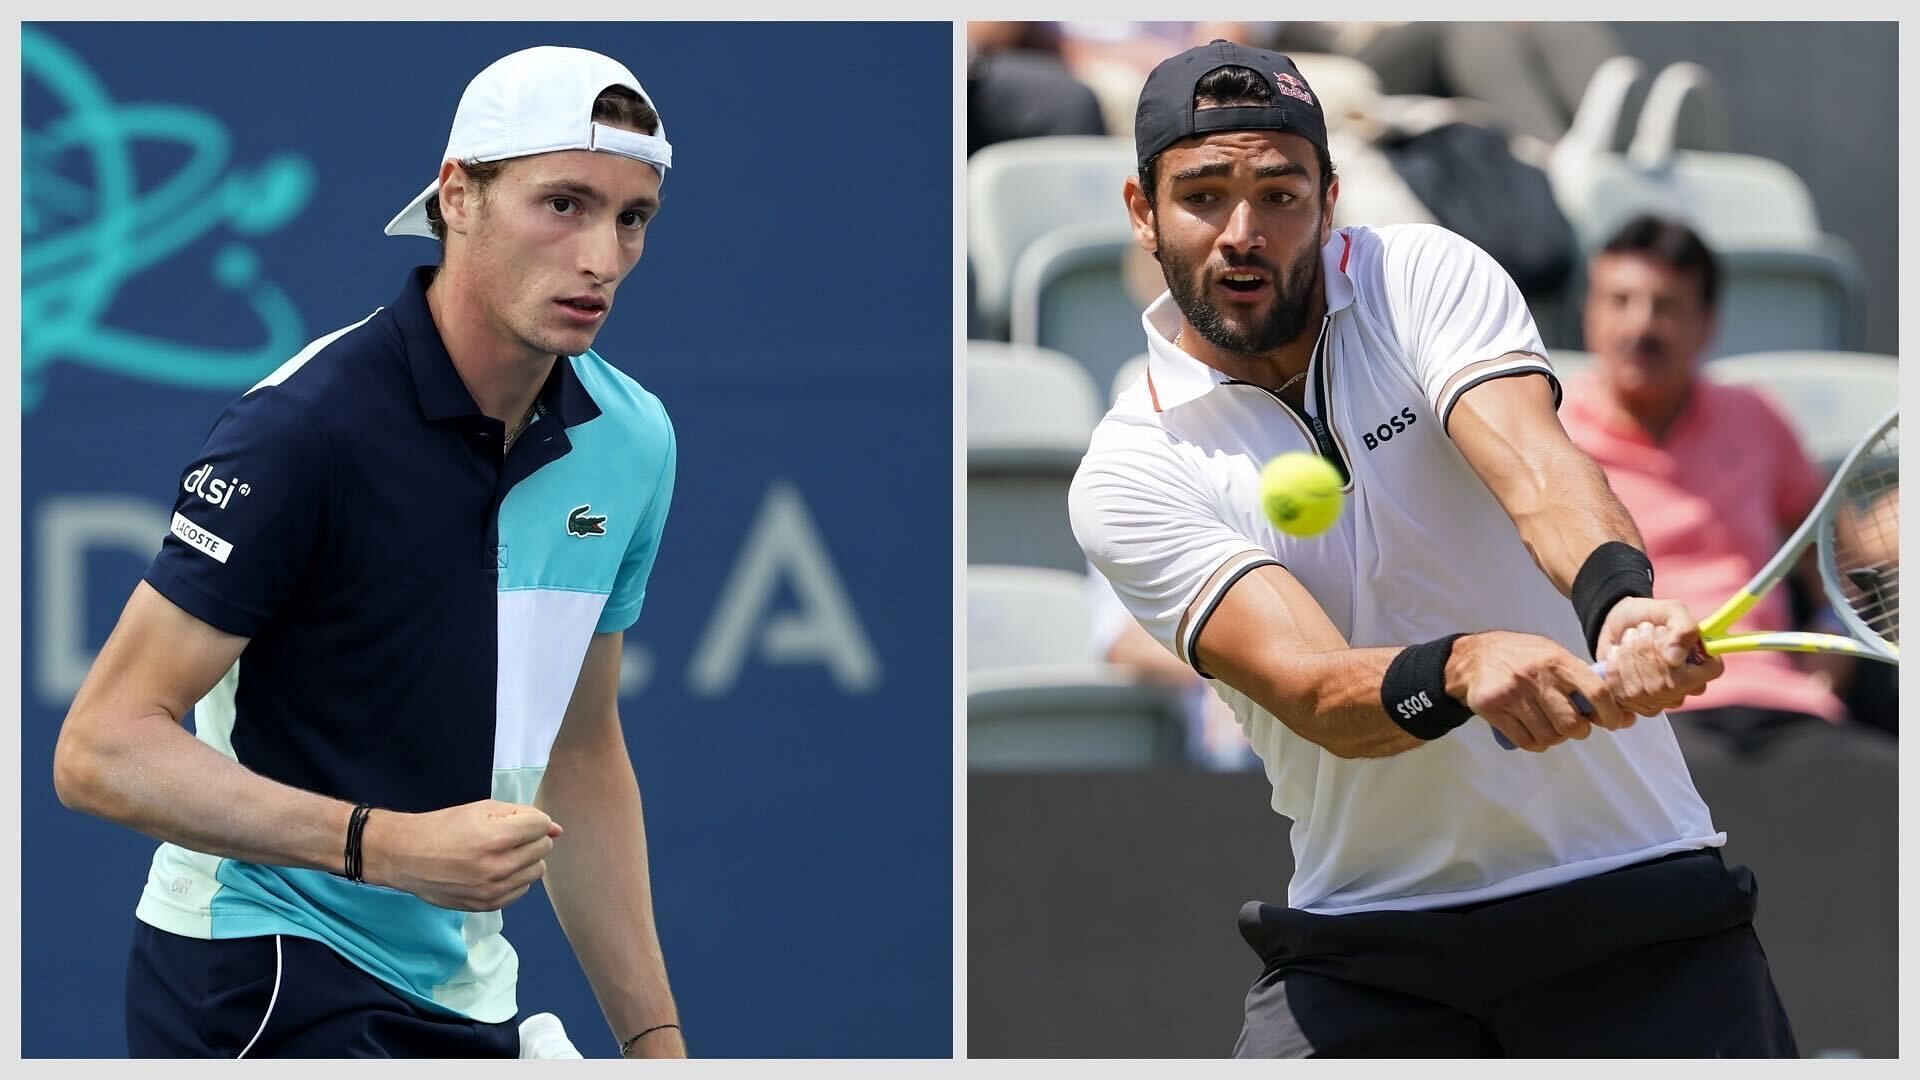 Ugo Humbert vs Matteo Berrettini is one of the first-round matches at the 2023 US Open.